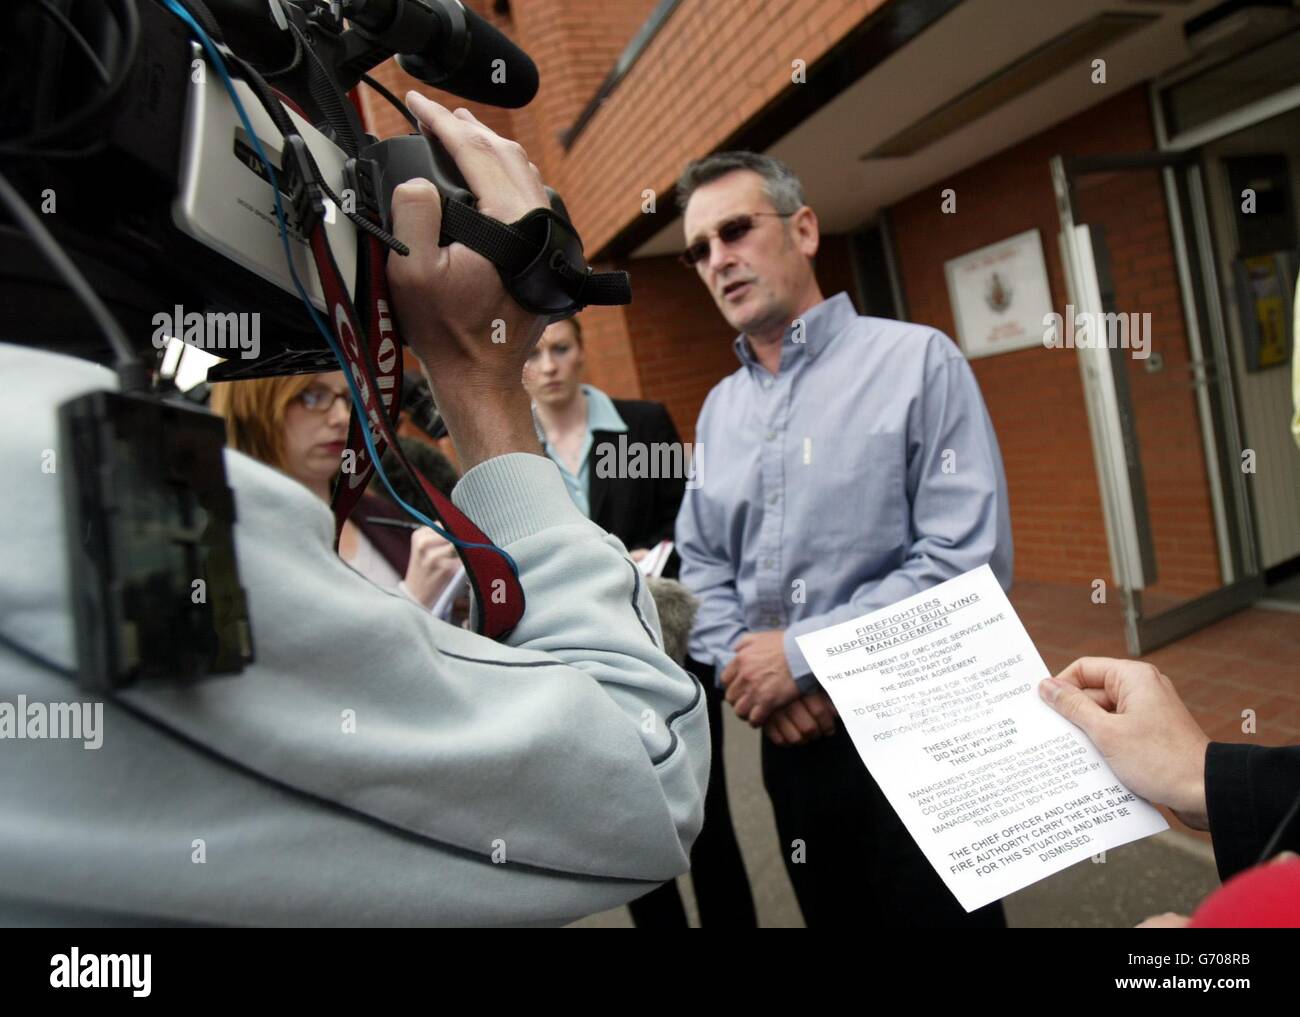 Ian Johnson, representative of the FBU for Salford, speaks to reporters, announcing a meeting a fire brigade headquarters with the intention of reinstating suspended firefighters. Stock Photo